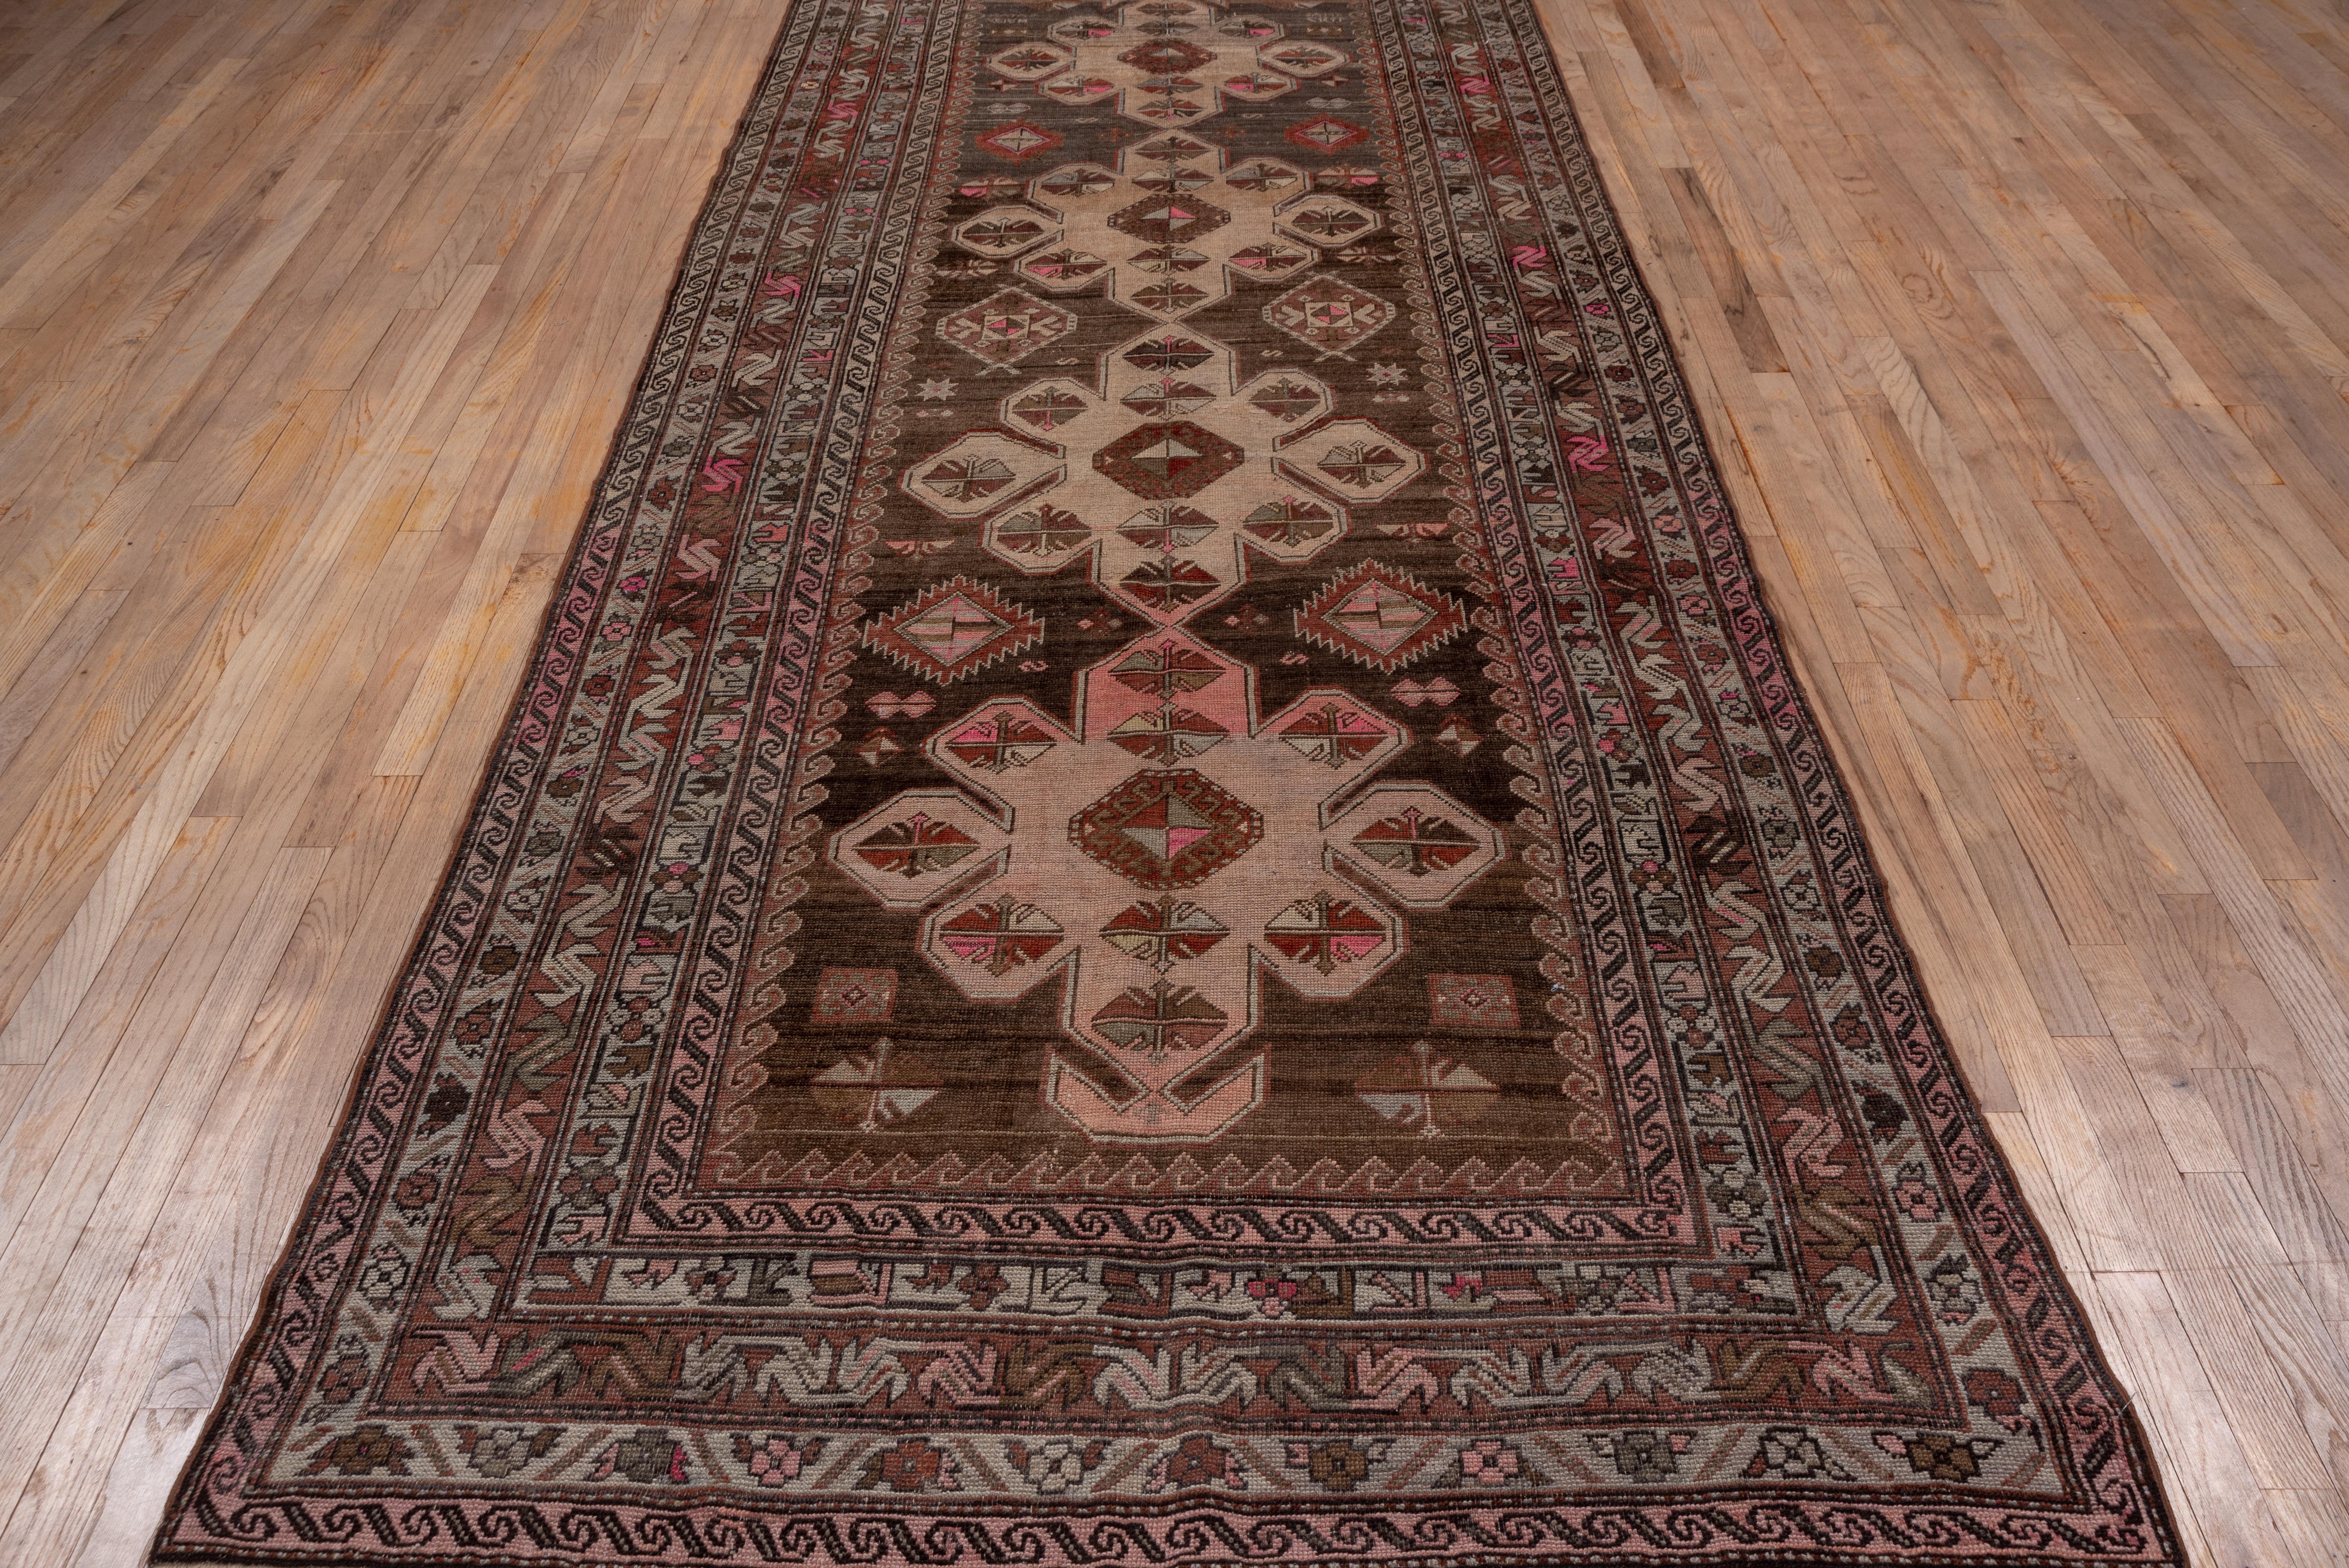 From the border area between Persia and the Caucasus, this geometric gallery carpet features four eight-lobed, connected medallions in sand and straw on an abrashed red-brown ground, with central hooked octagon motives. Hexagons and ashiks decorate